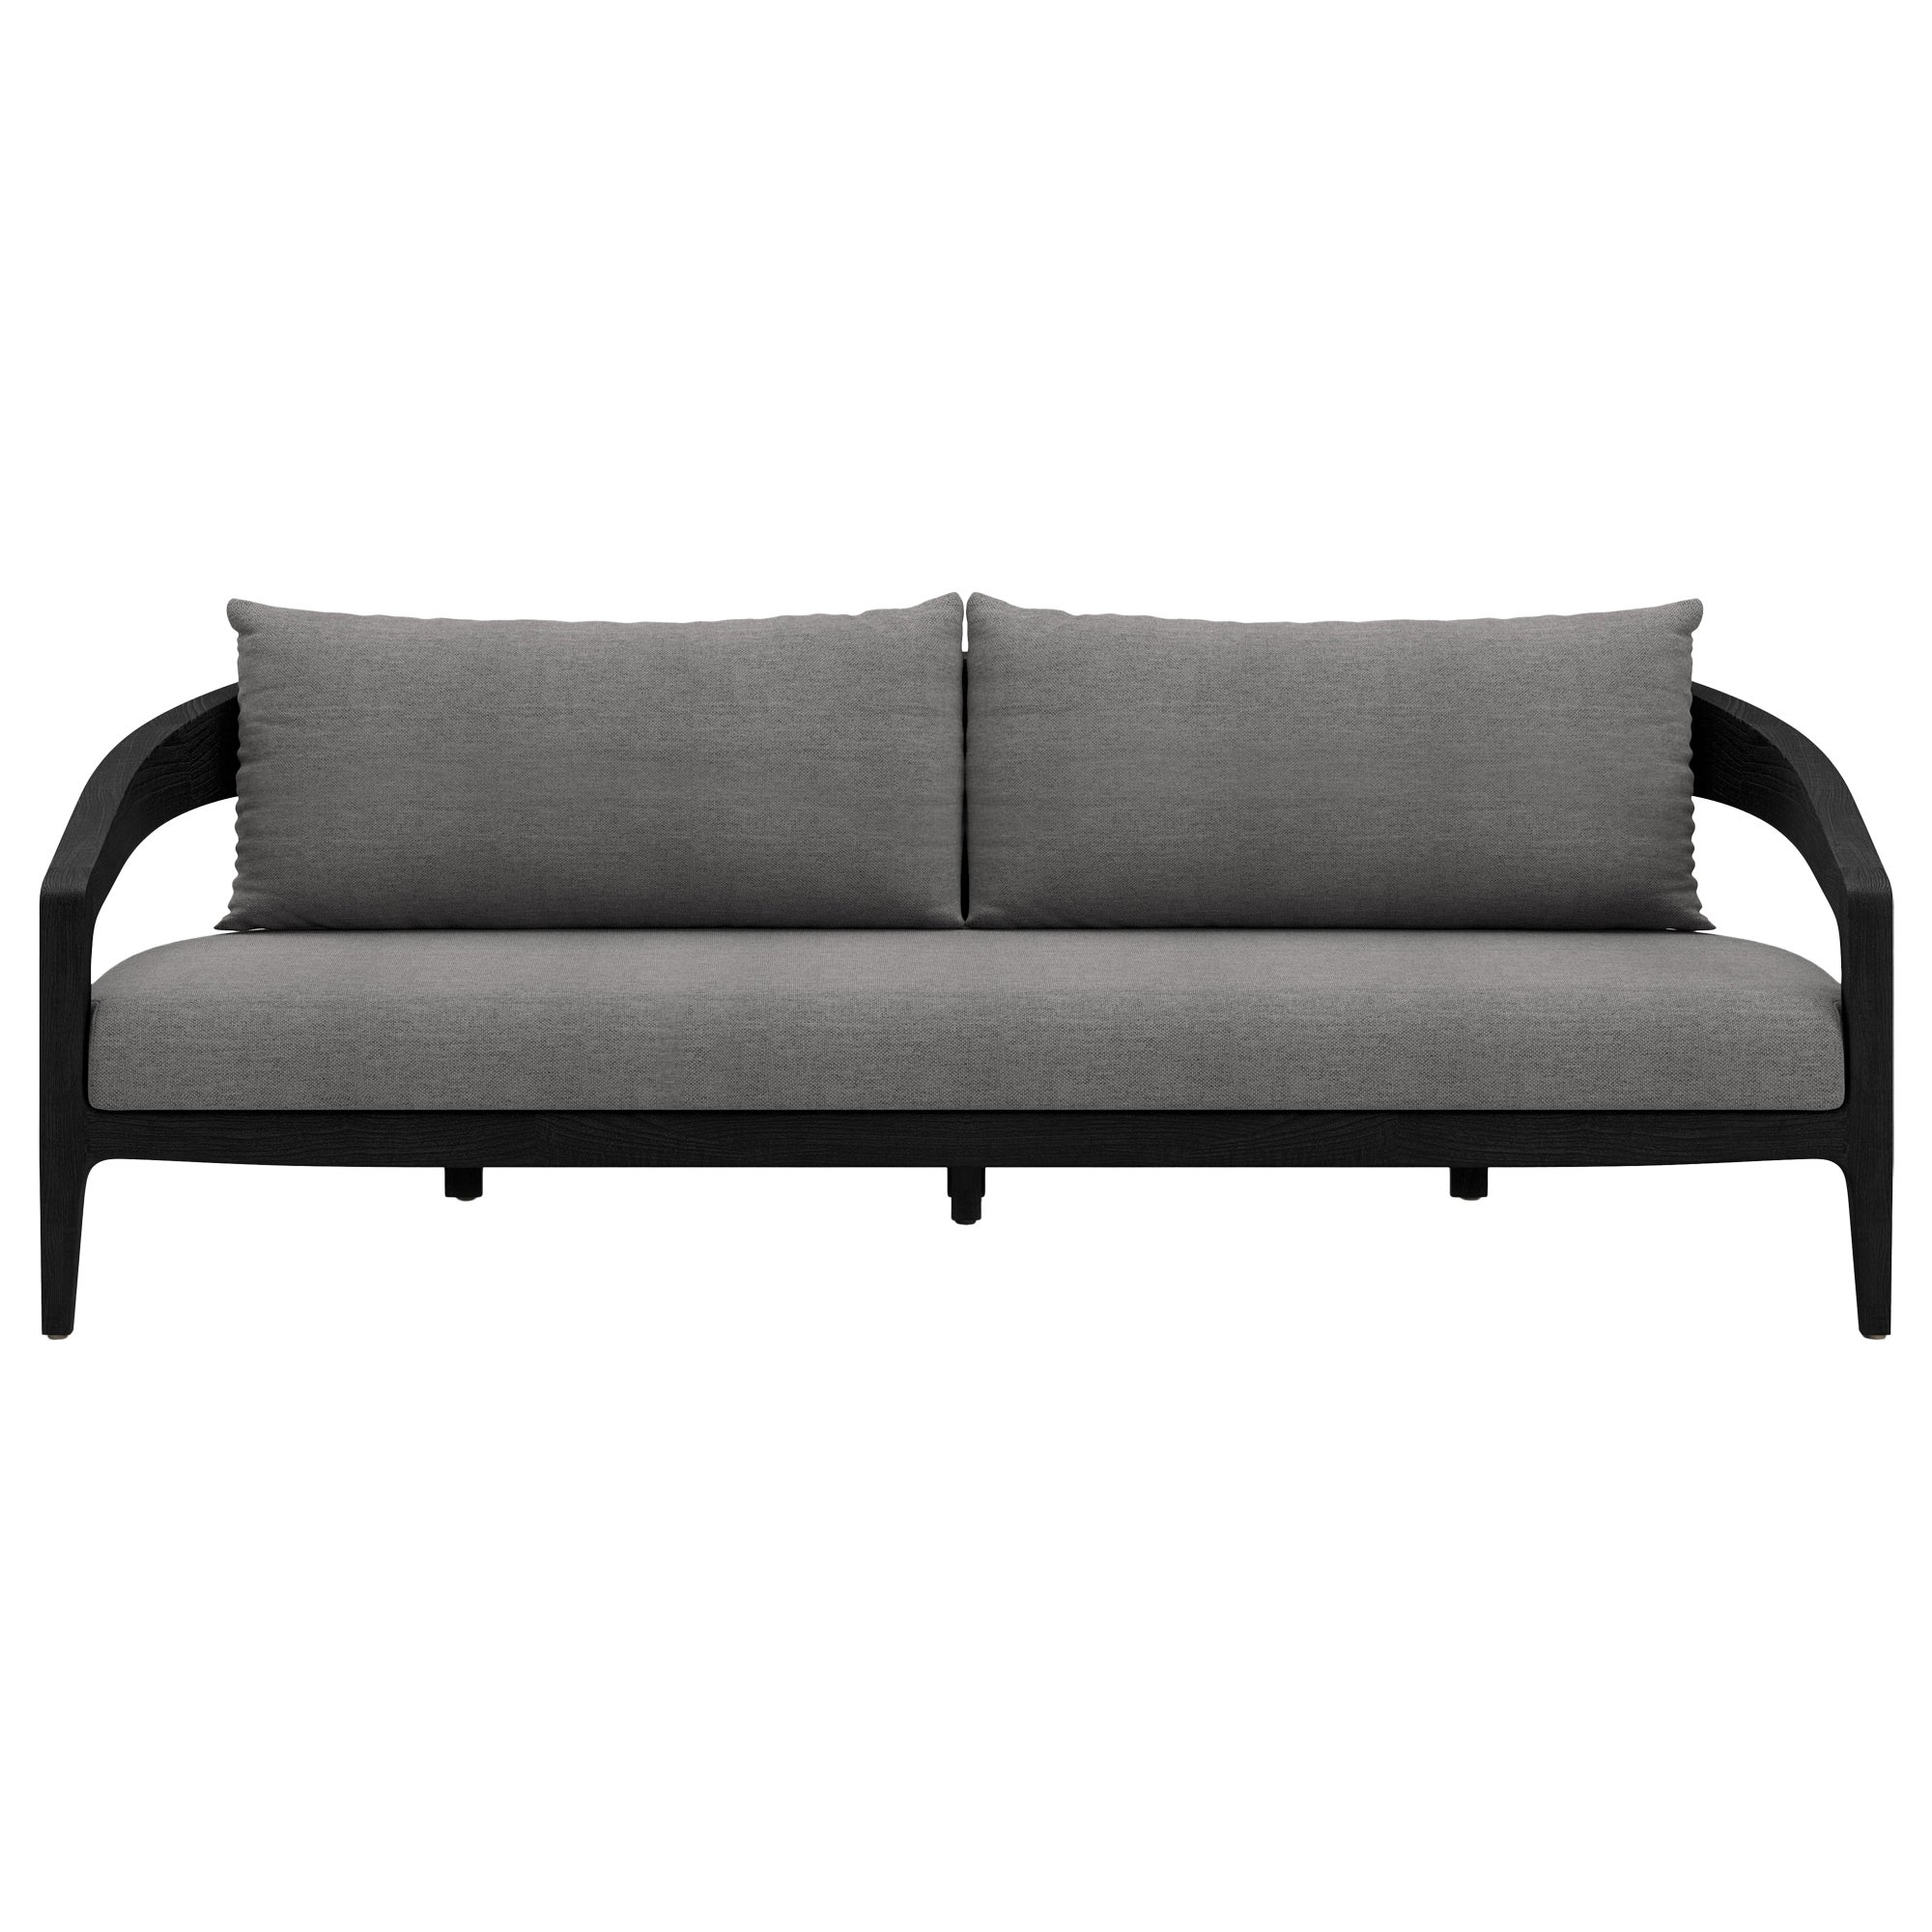 Whale-noche Outdoor 3 Seater Sofa by SNOC